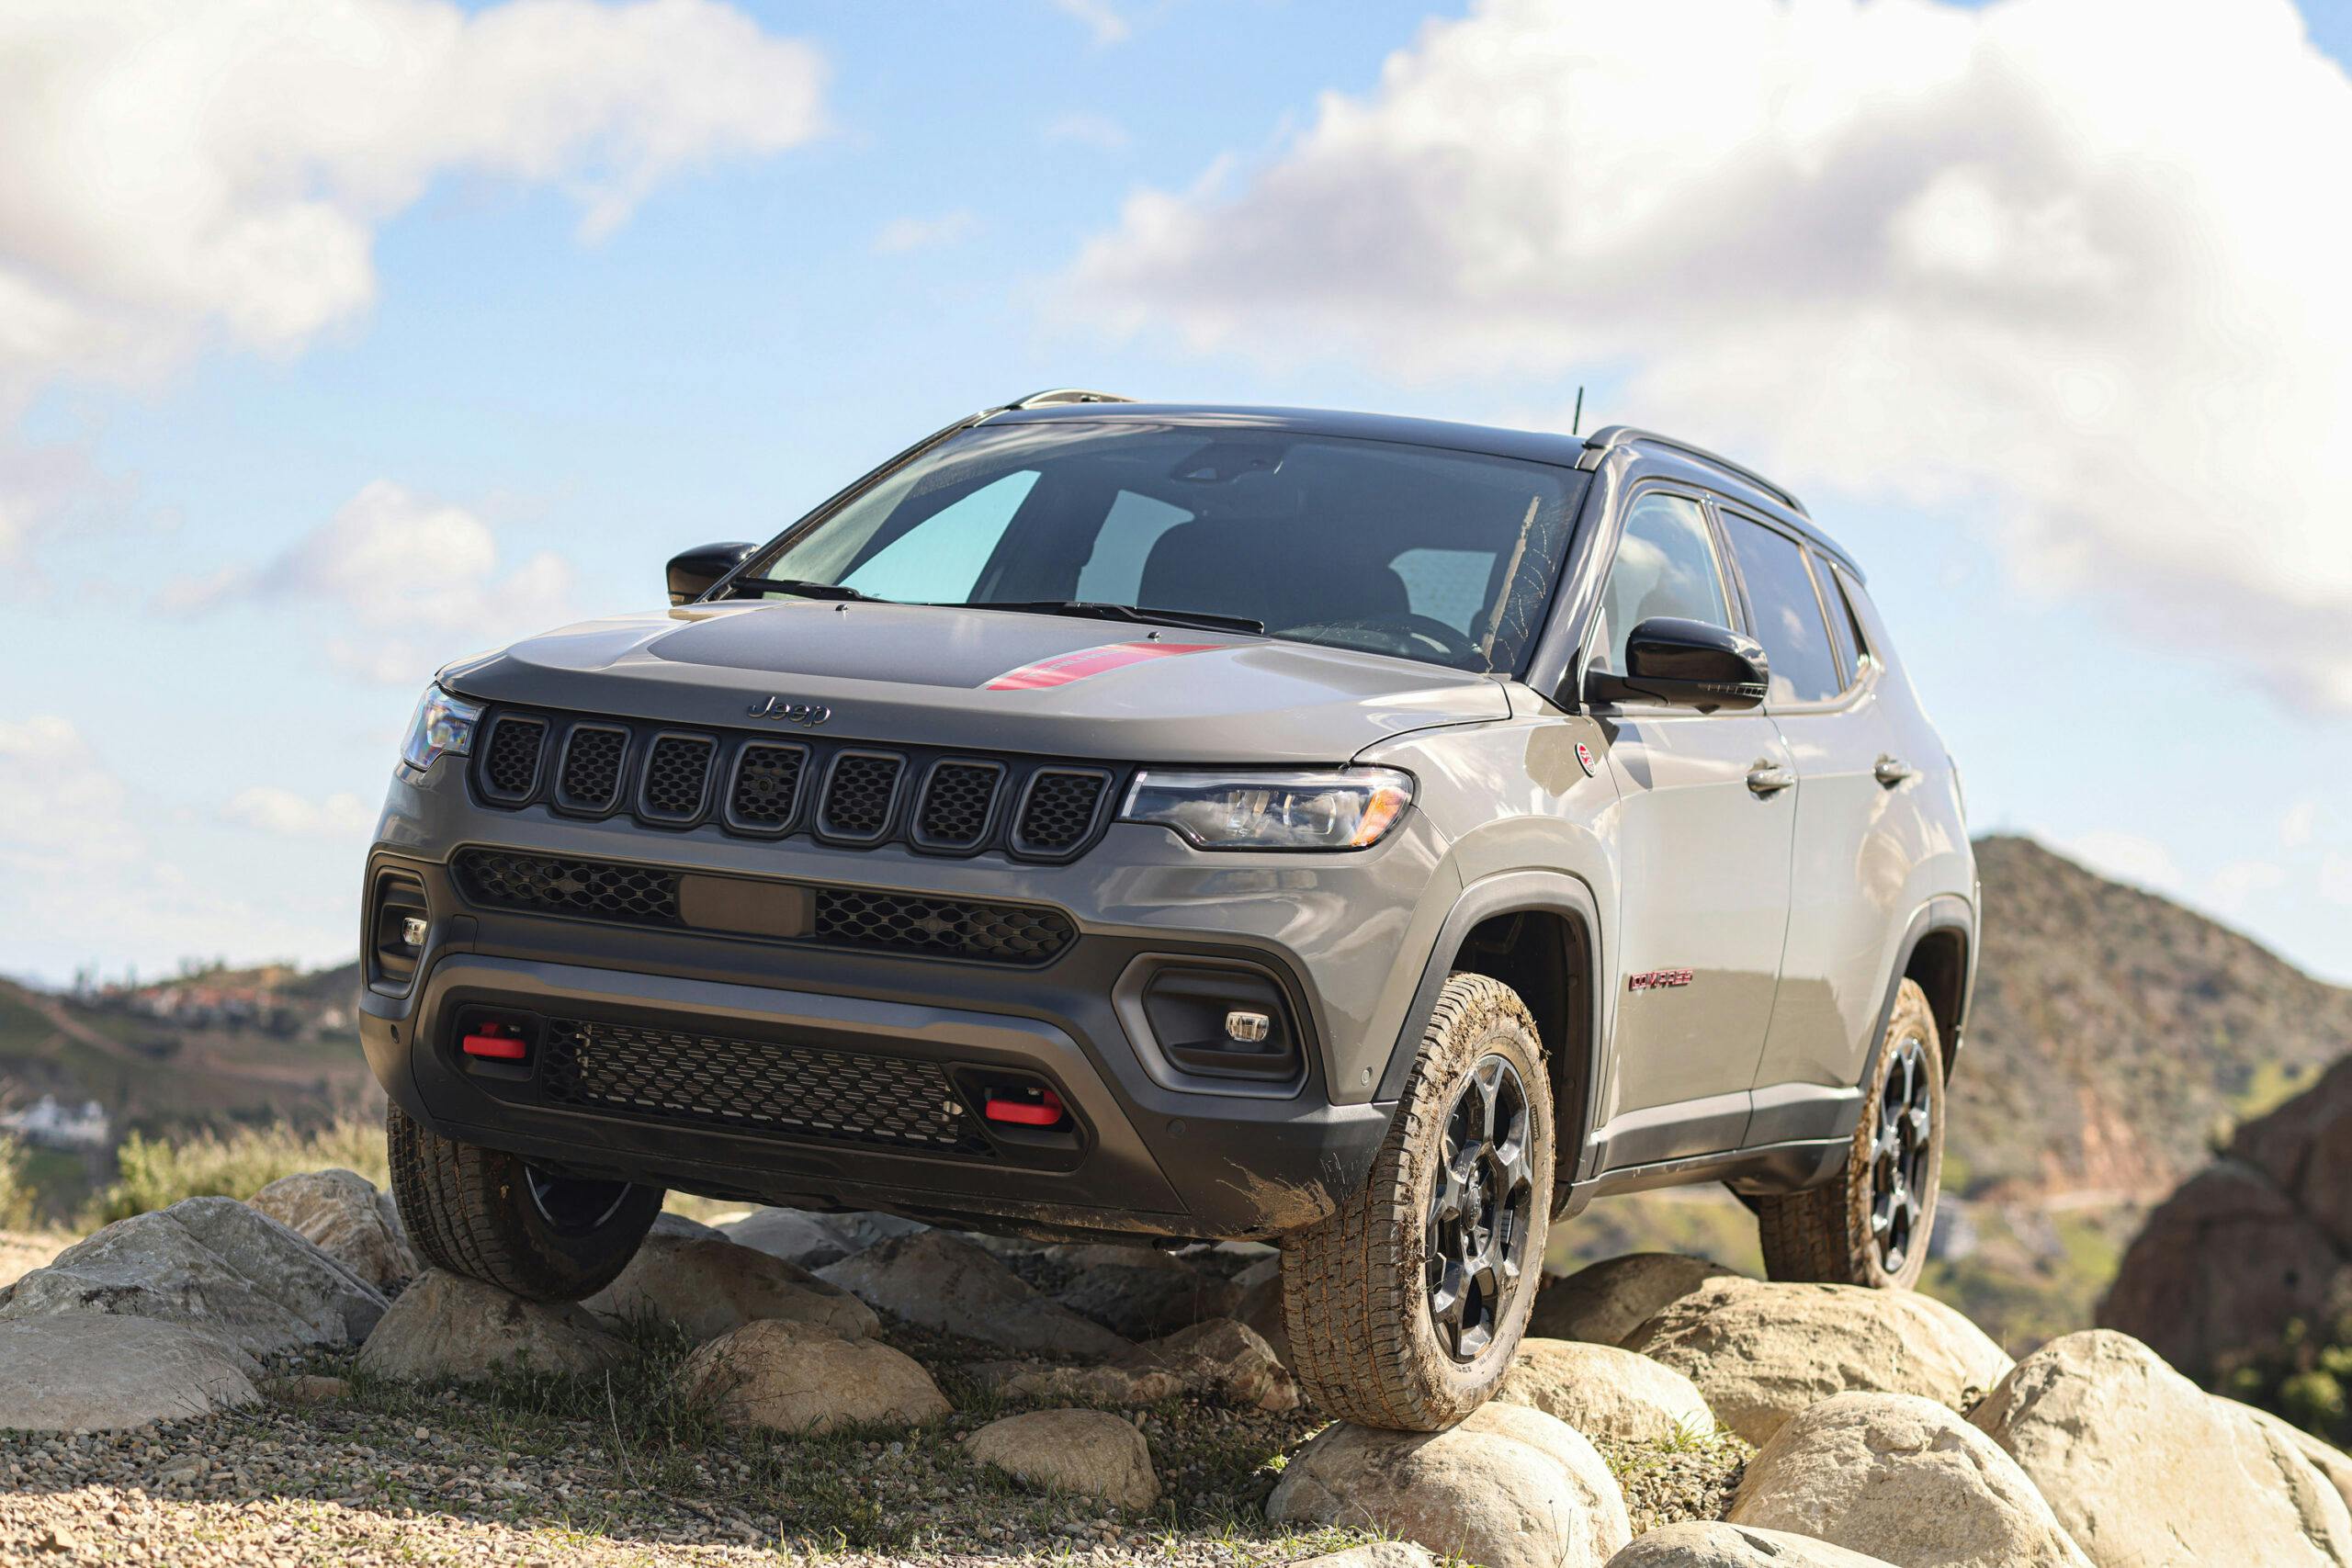 https://hagerty-media-prod.imgix.net/2023/02/2023-Jeep-Compass-Trailhawk-scaled.jpg?auto=format%2Ccompress&ixlib=php-3.3.0